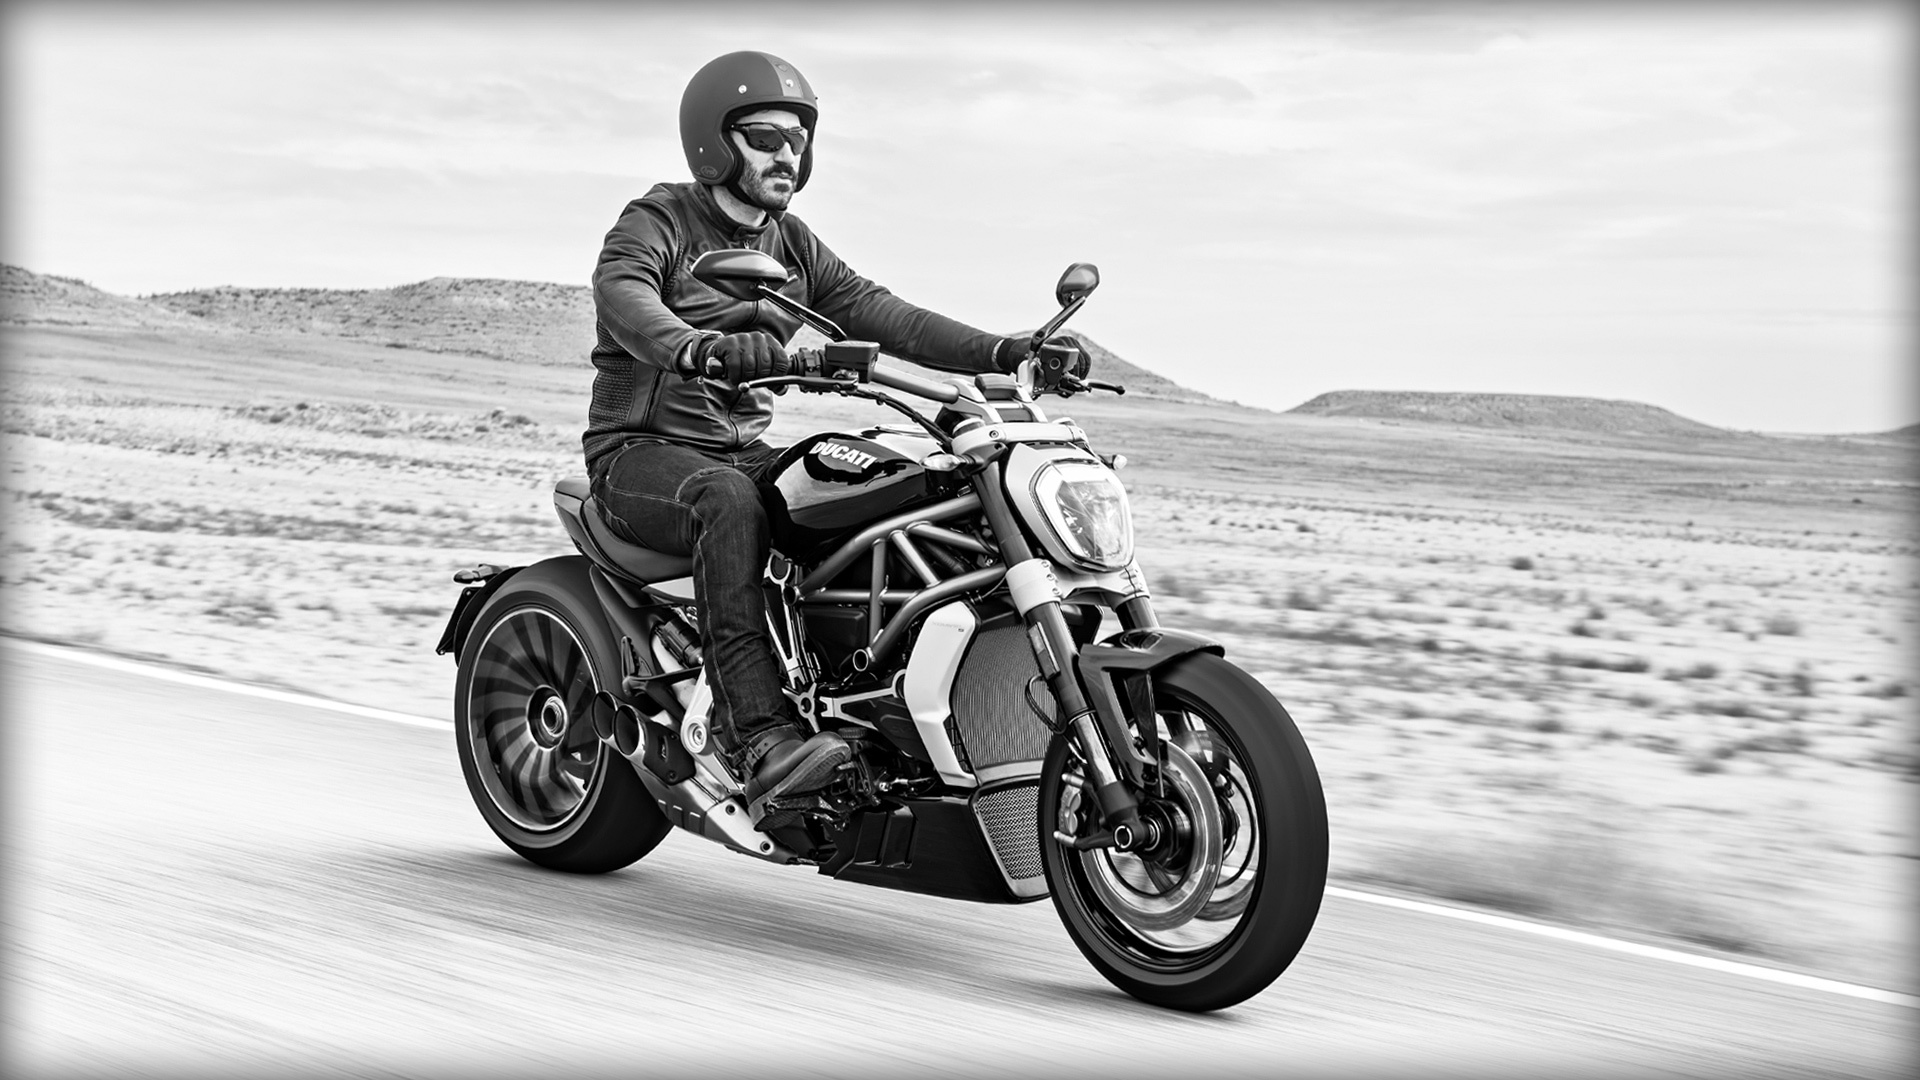 XDiavel-s_2016_Amb-01_1920x1080.mediagallery_output_image_[1920x1080].jpg